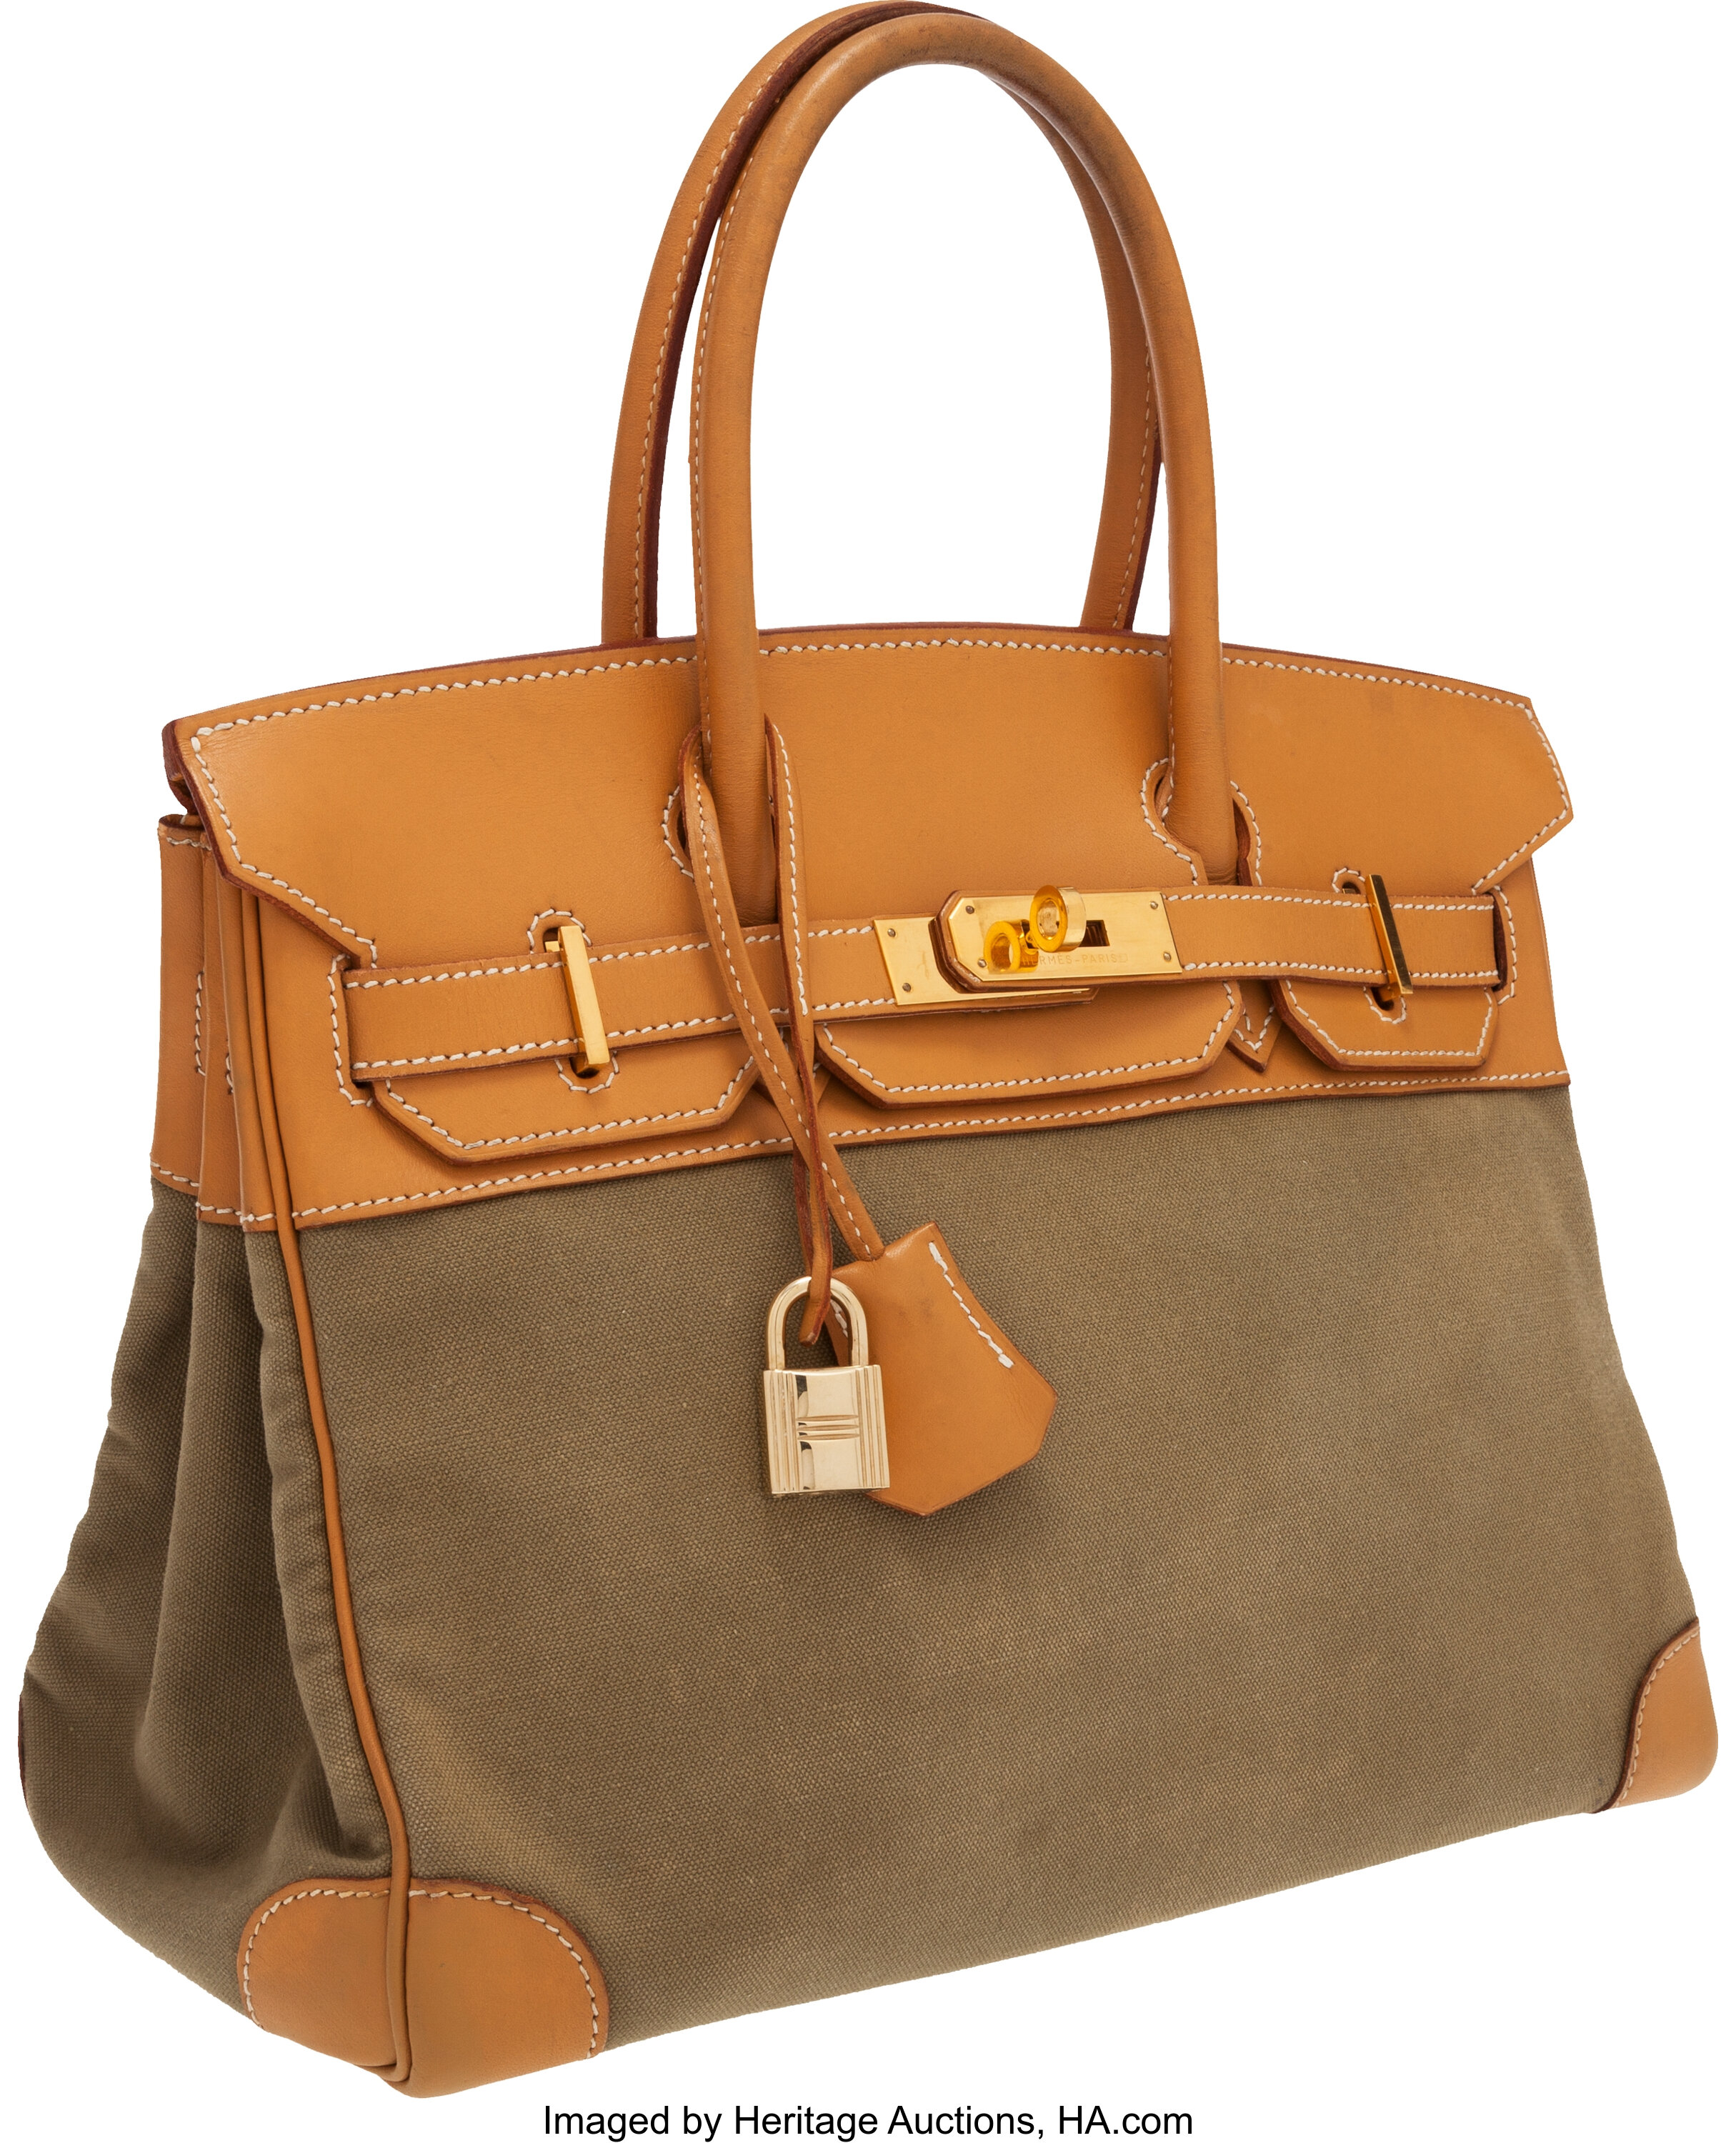 Sold at Auction: Hermes Leather And Canvas Tote Bag